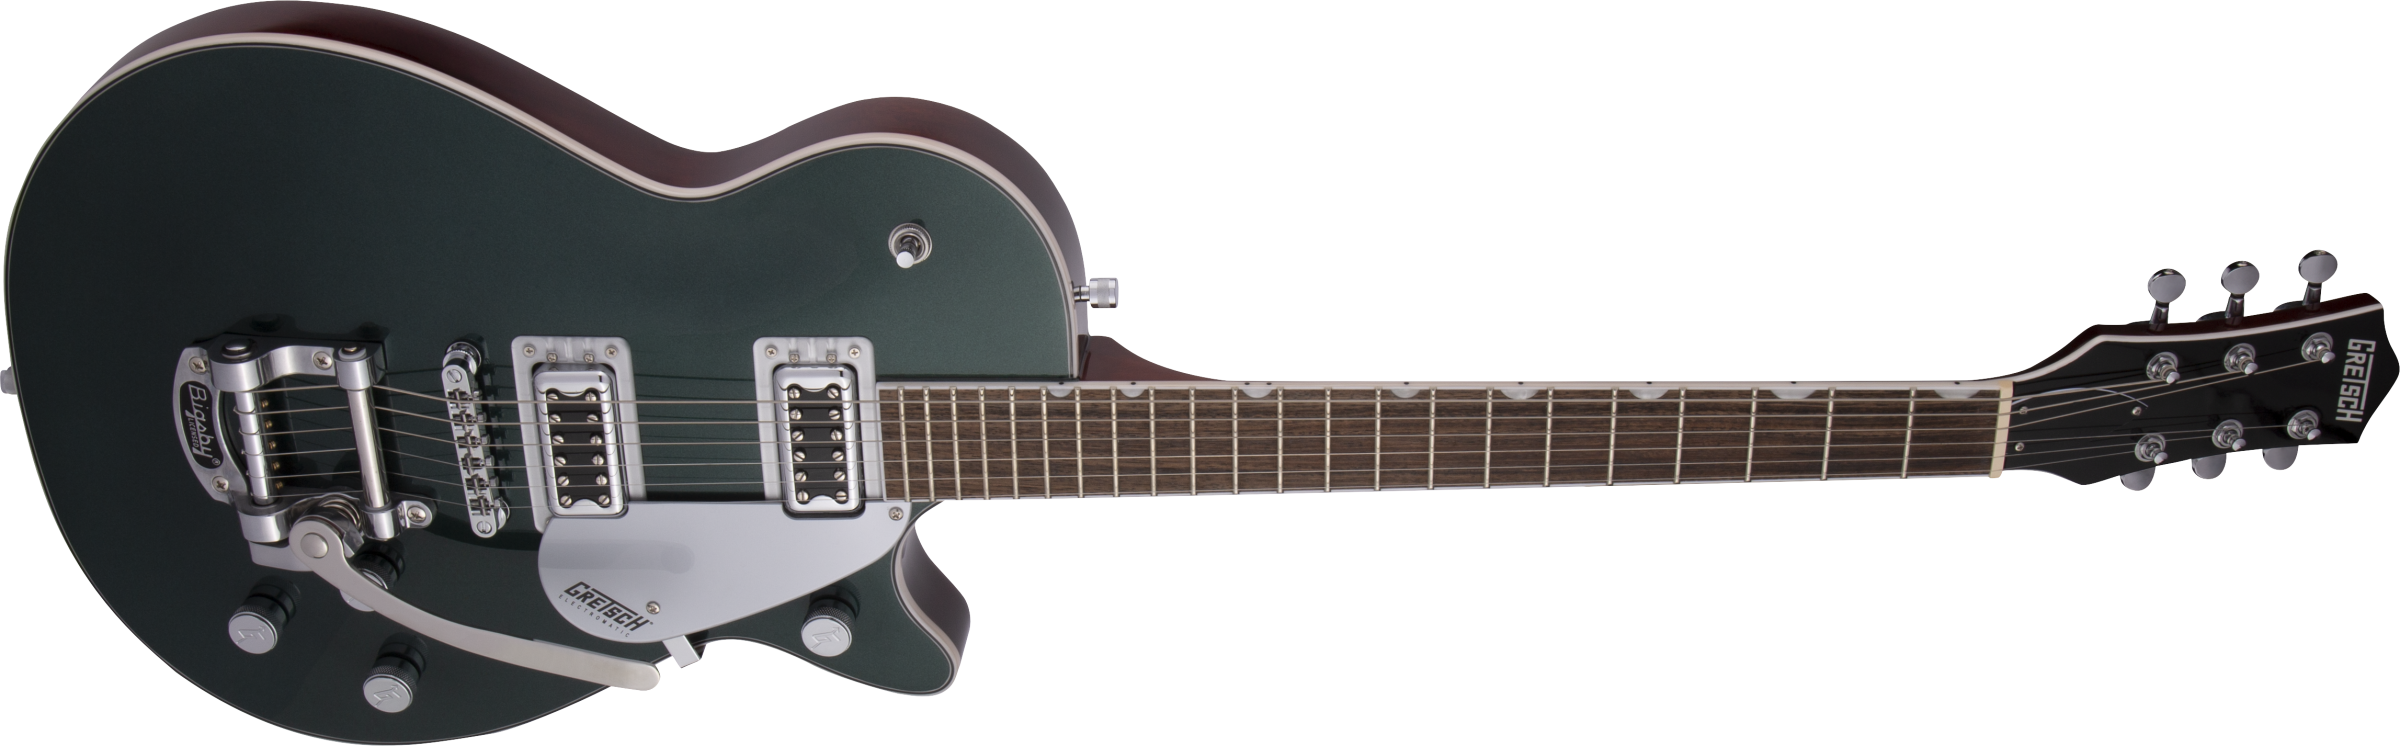 GRETSCH G5230T ELECTROMATIC JET FT SINGLE-CUT ELECTRIC GUITAR W/BIGSBY, CADILLAC GREEN